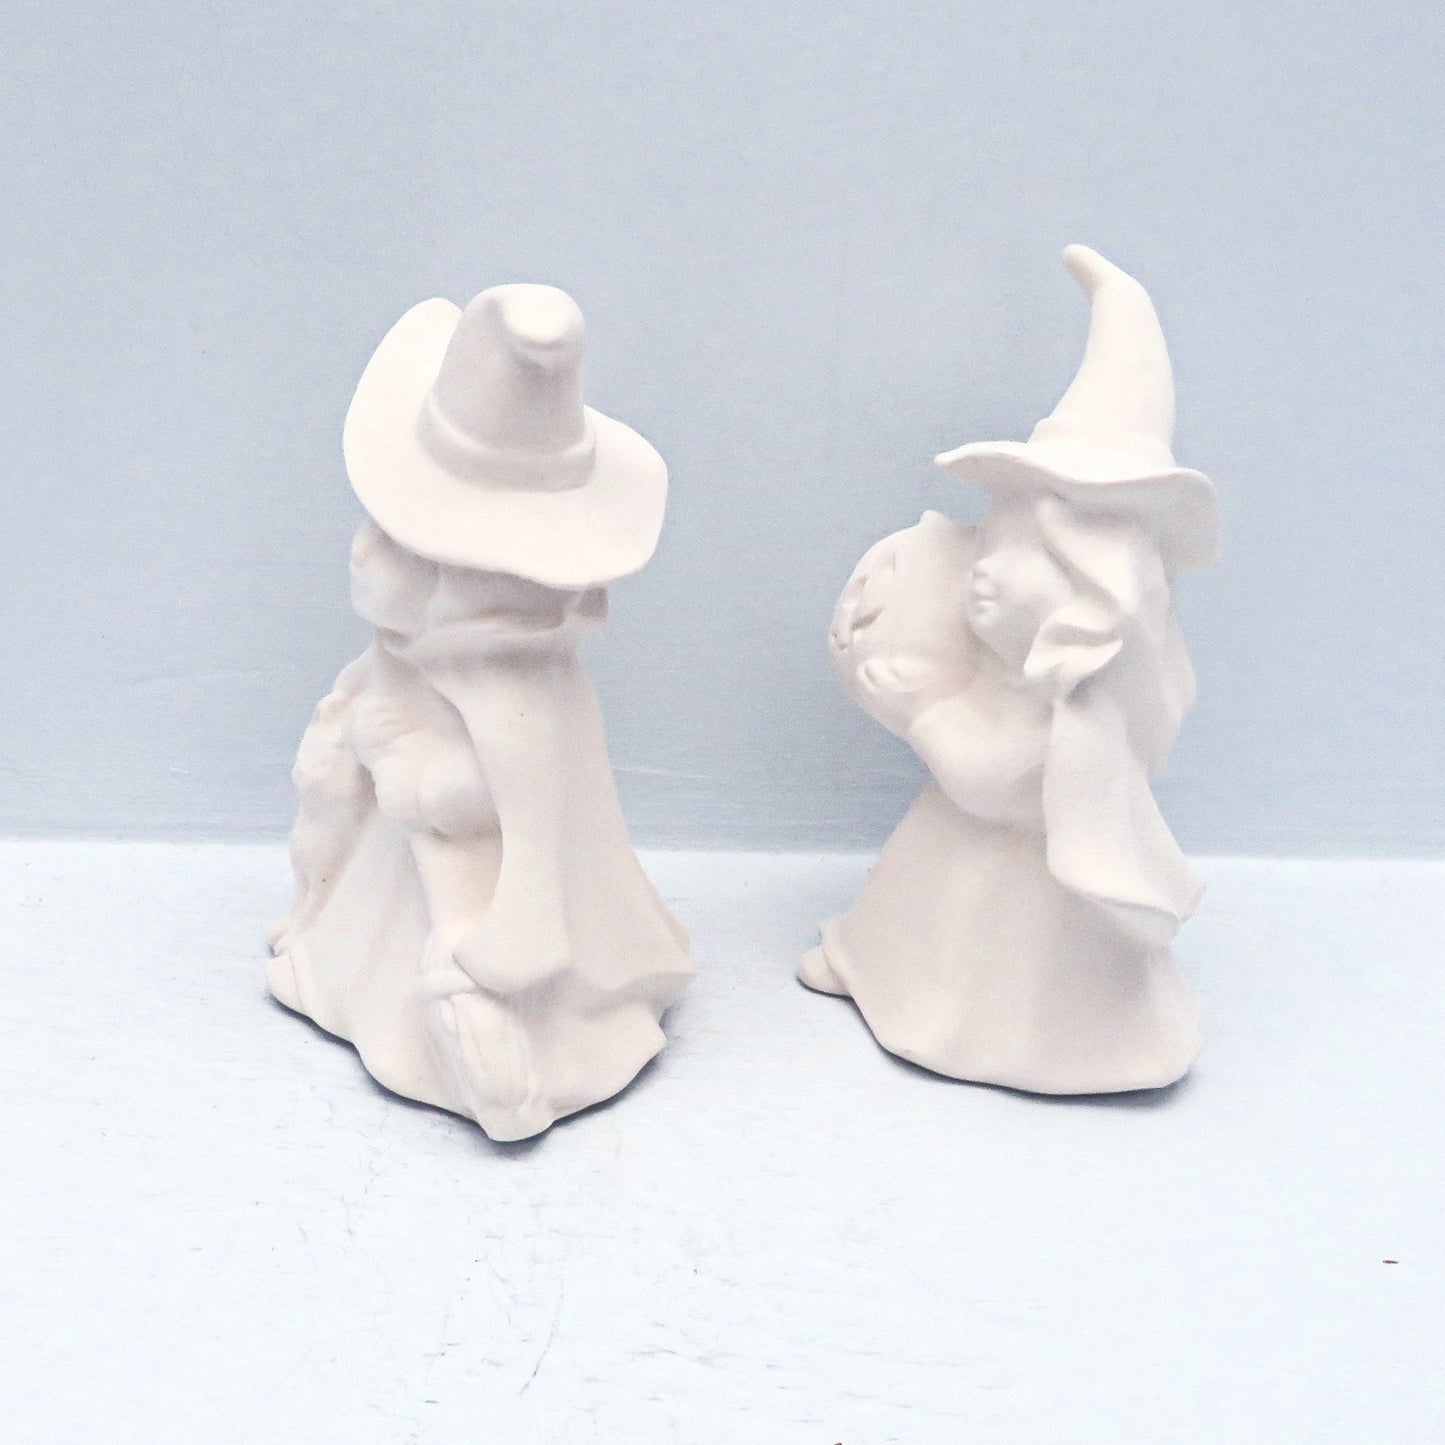 Handmade Ceramic Witch Statues, Witch Figurines, Halloween Decor, Unpainted Bisque, Ready to Paint Ceramics, Paintable Ceramics